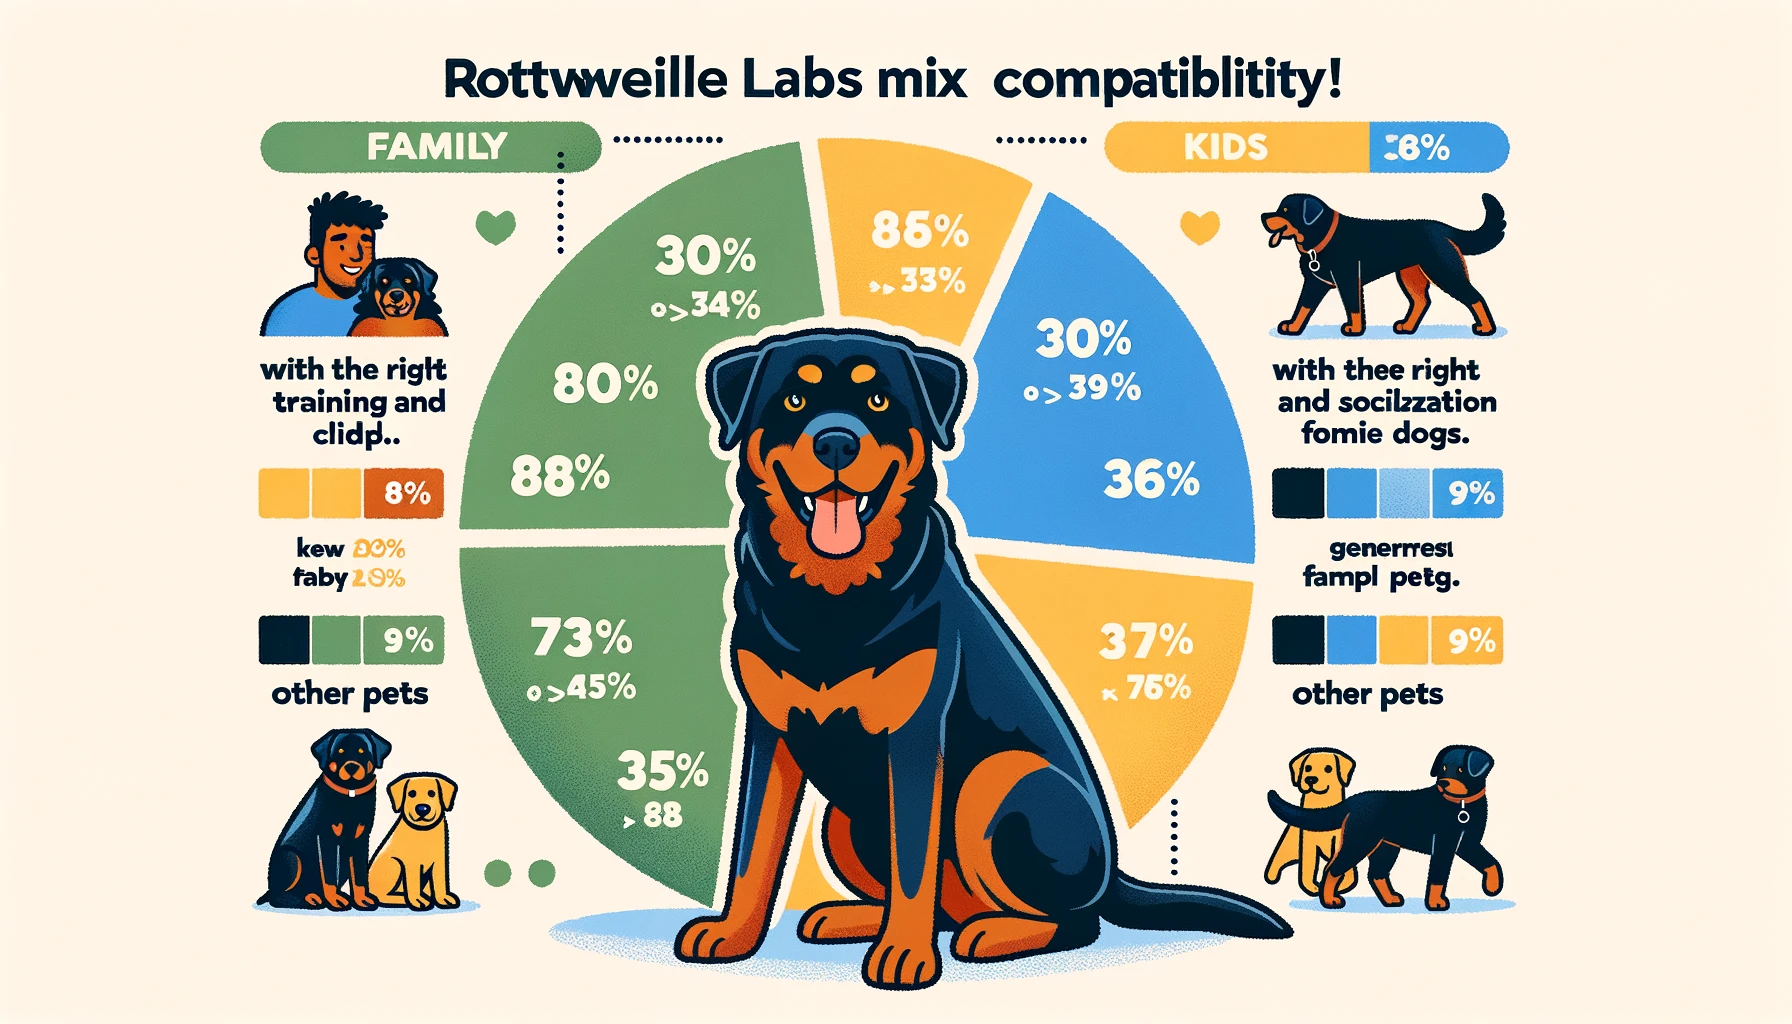 A pie chart showing the Rottweiler Lab Mix's compatibility score with family, kids, and other pets, emphasizing that they're generally good family pets with the right training and socialization